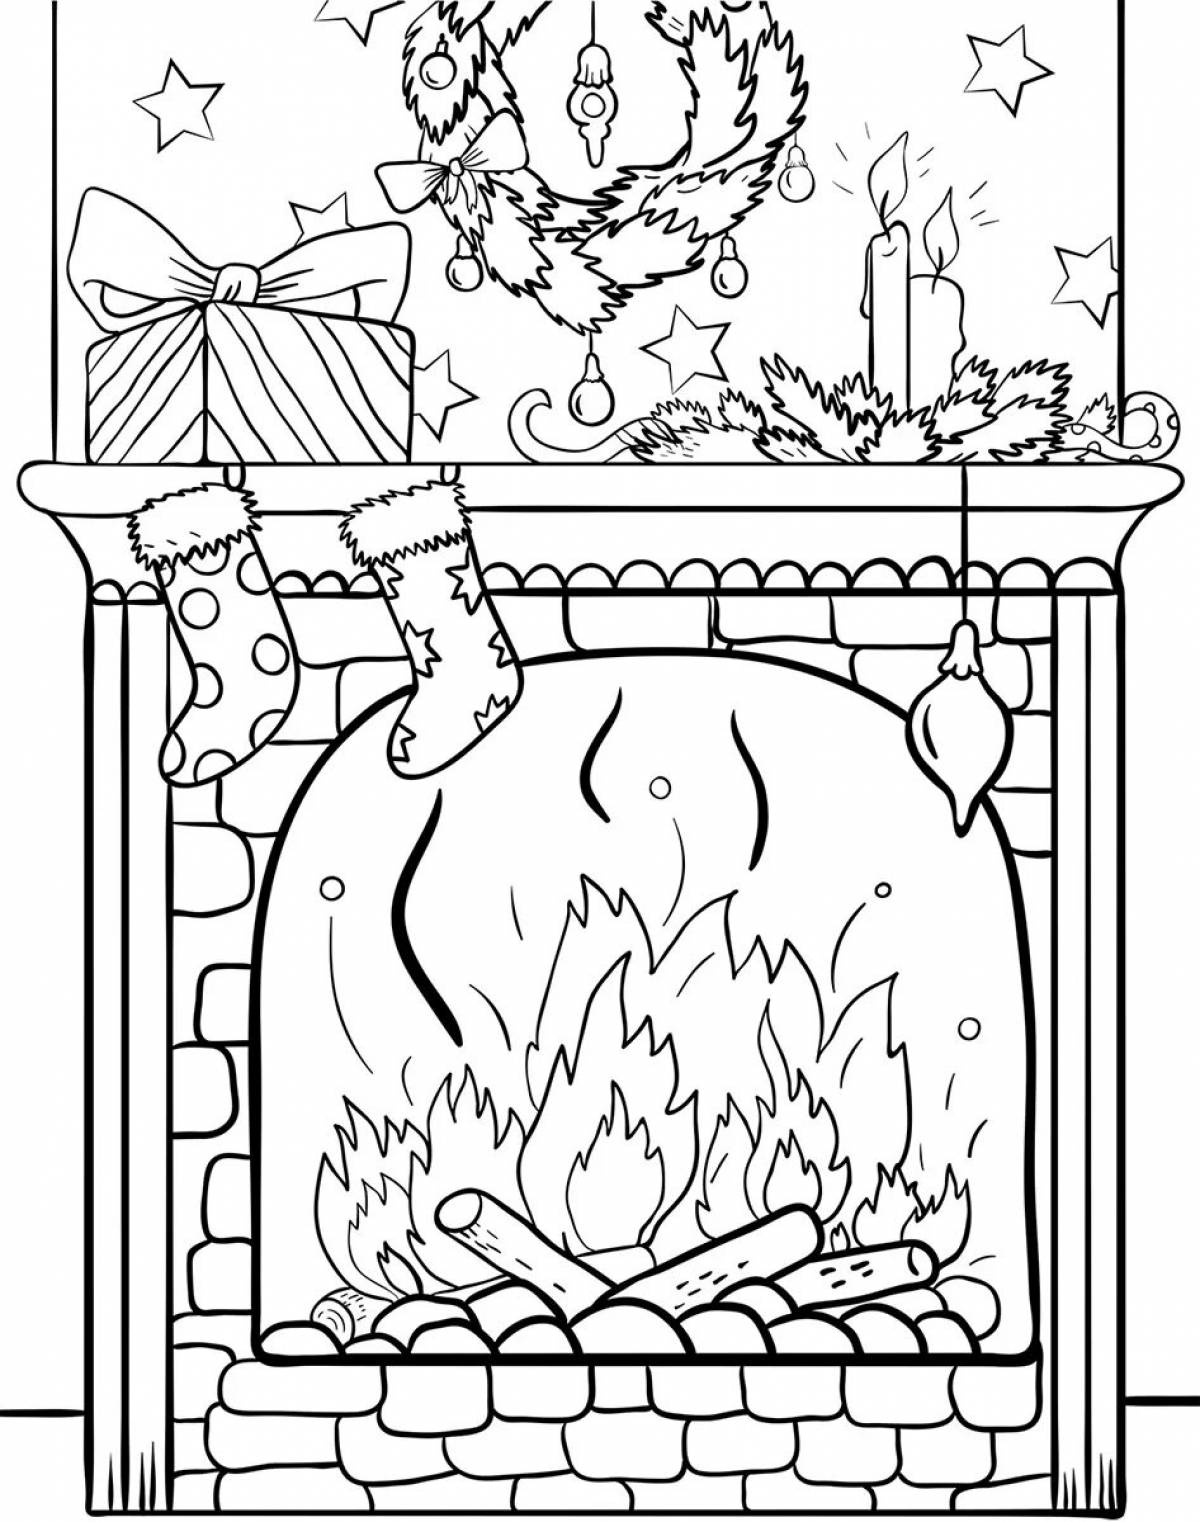 Grand fire friend fire enemy coloring pages for kids